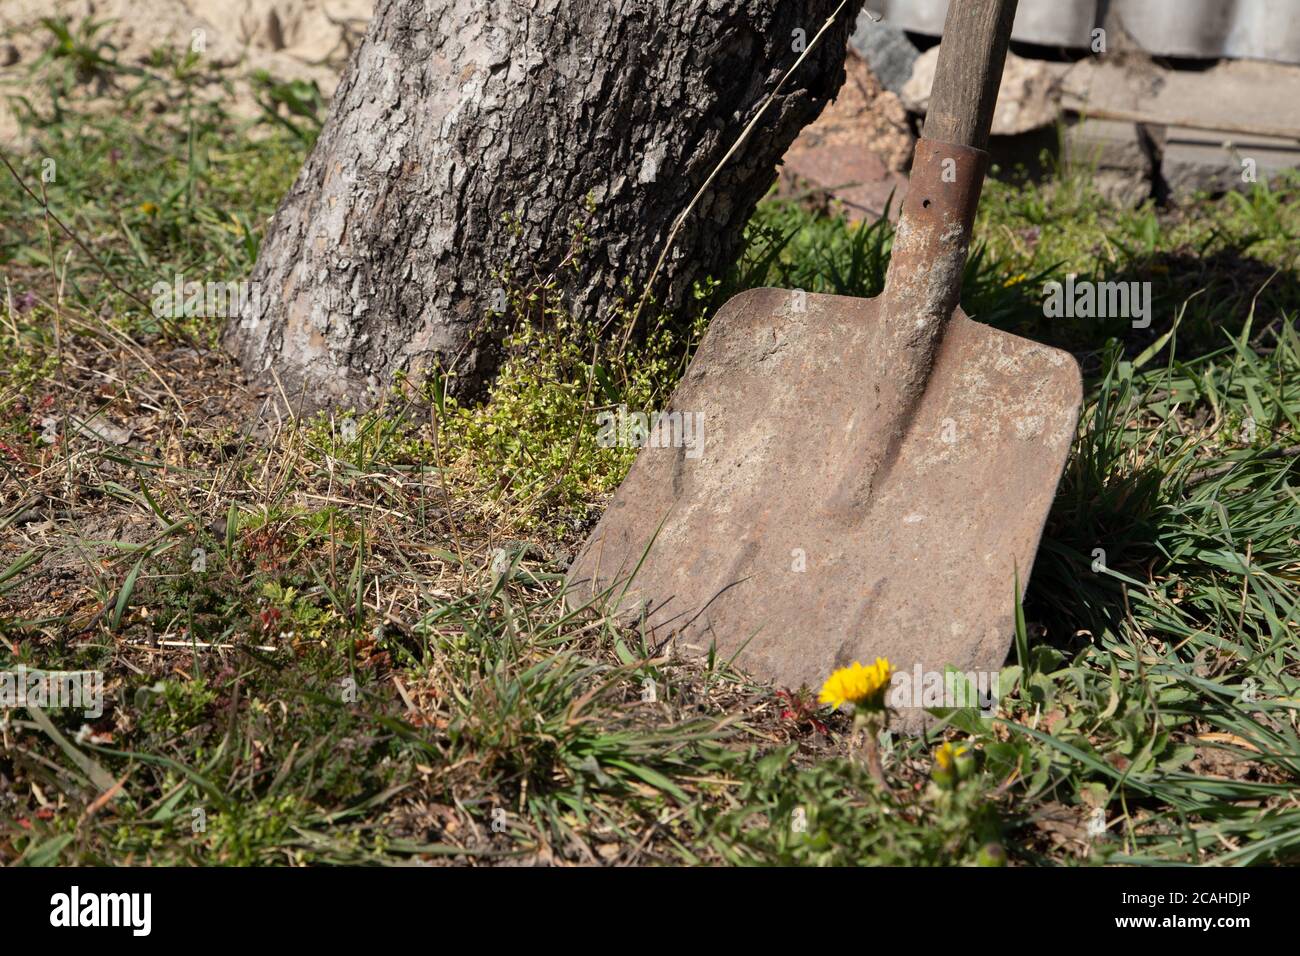 Old dirty shovel used in construction or agriculture leaning on brick white wall Stock Photo